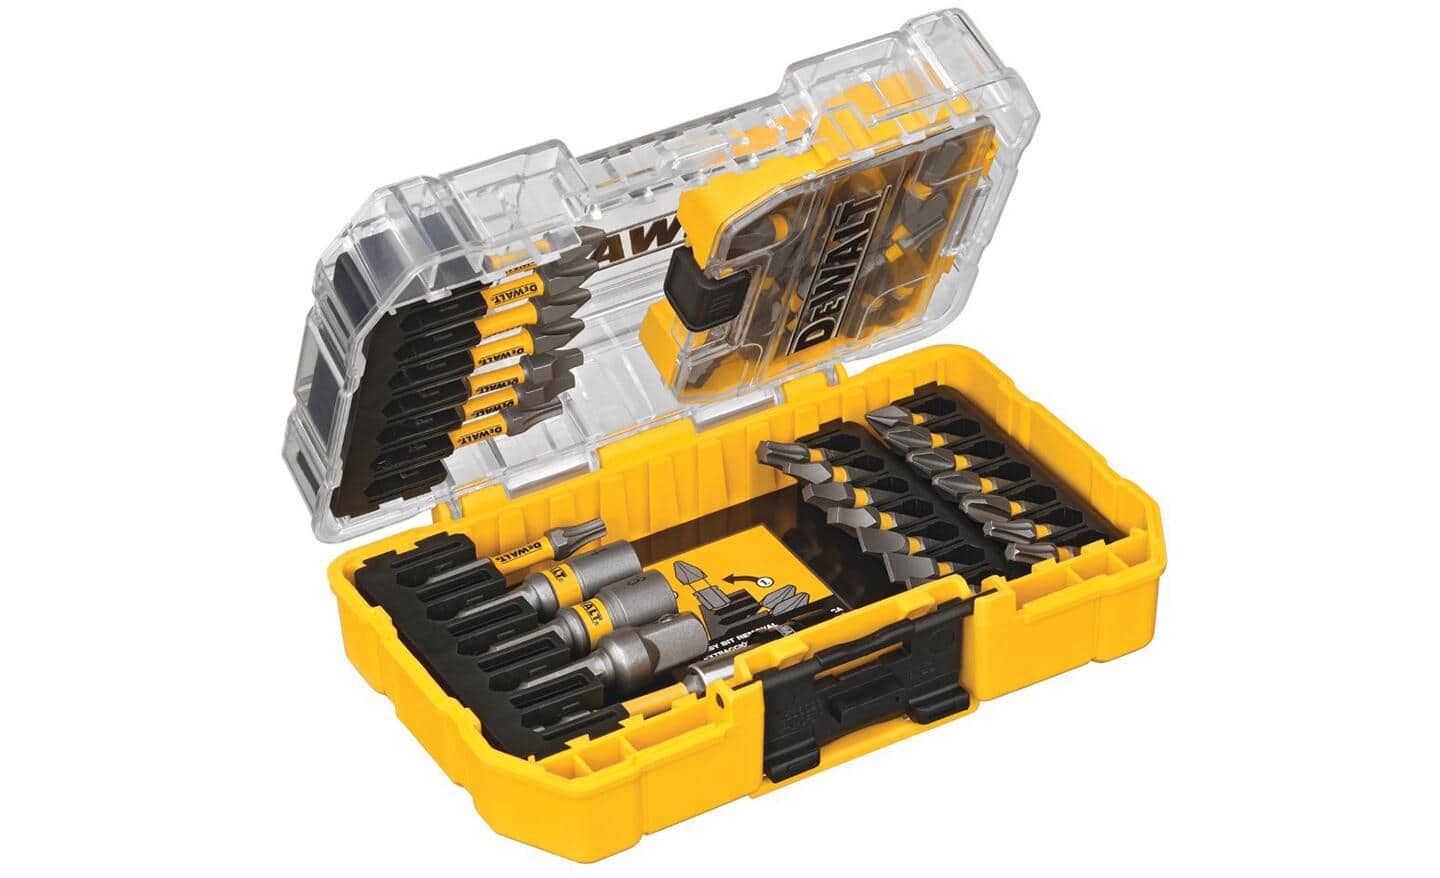 An opened yellow case shows drill bits stored inside.